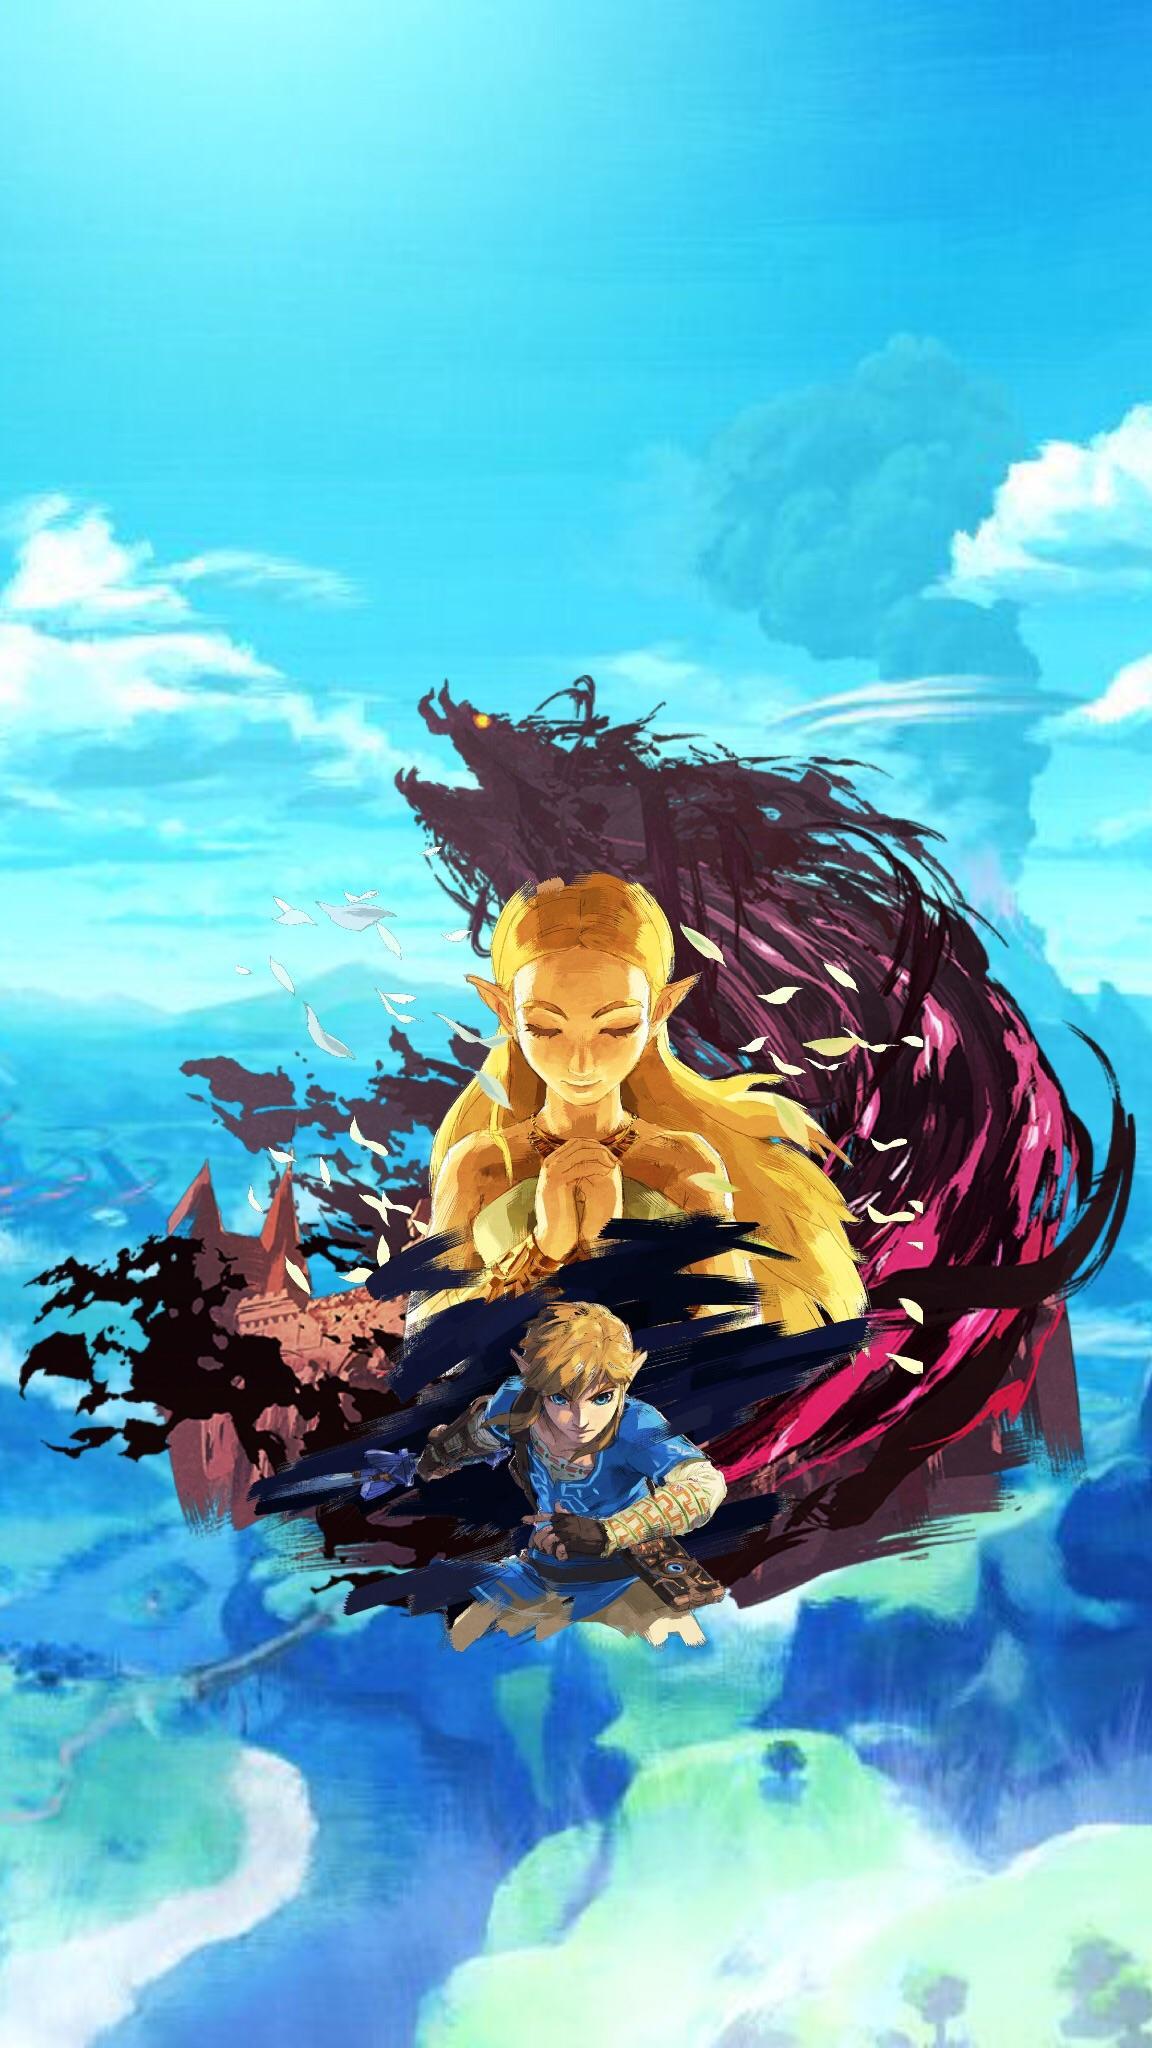 BotW iOS lock screen wallpapers I quickly whipped up if